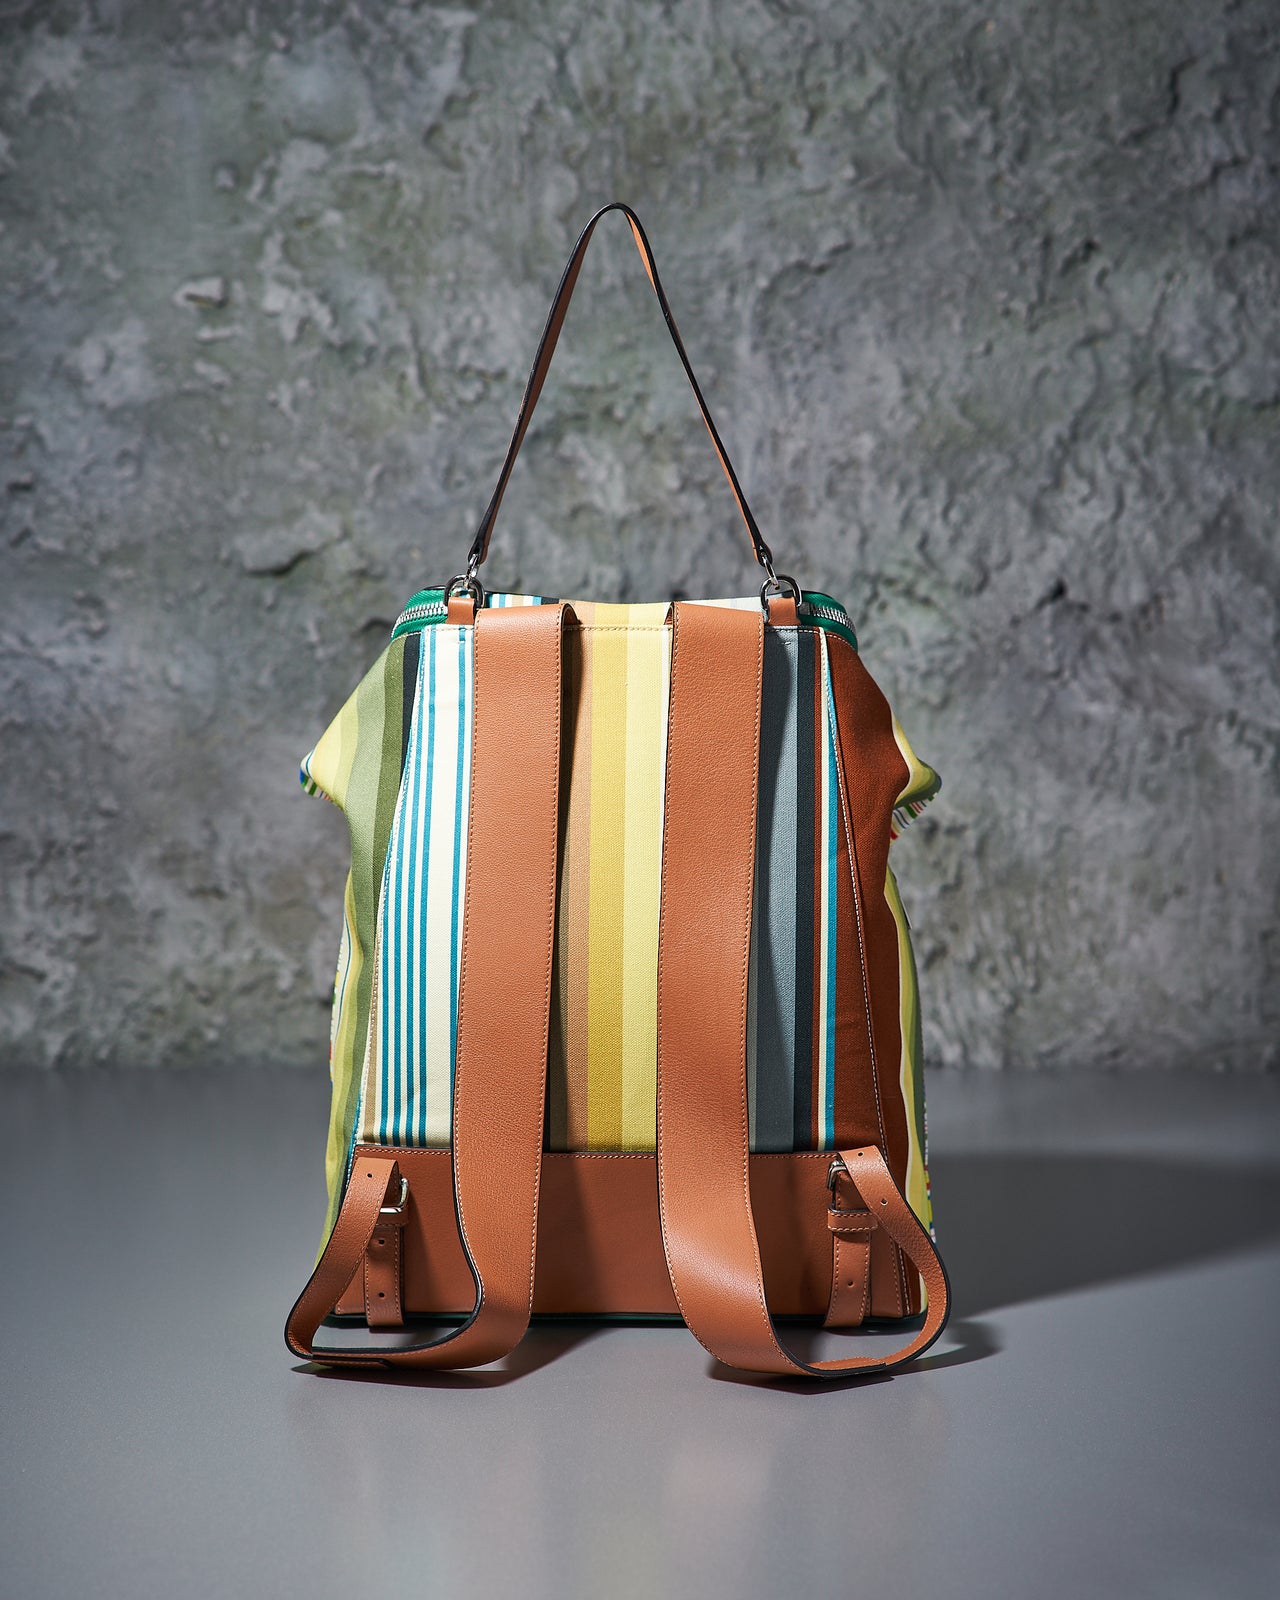 Loewe Goya Striped Canvas and Leather Backpack